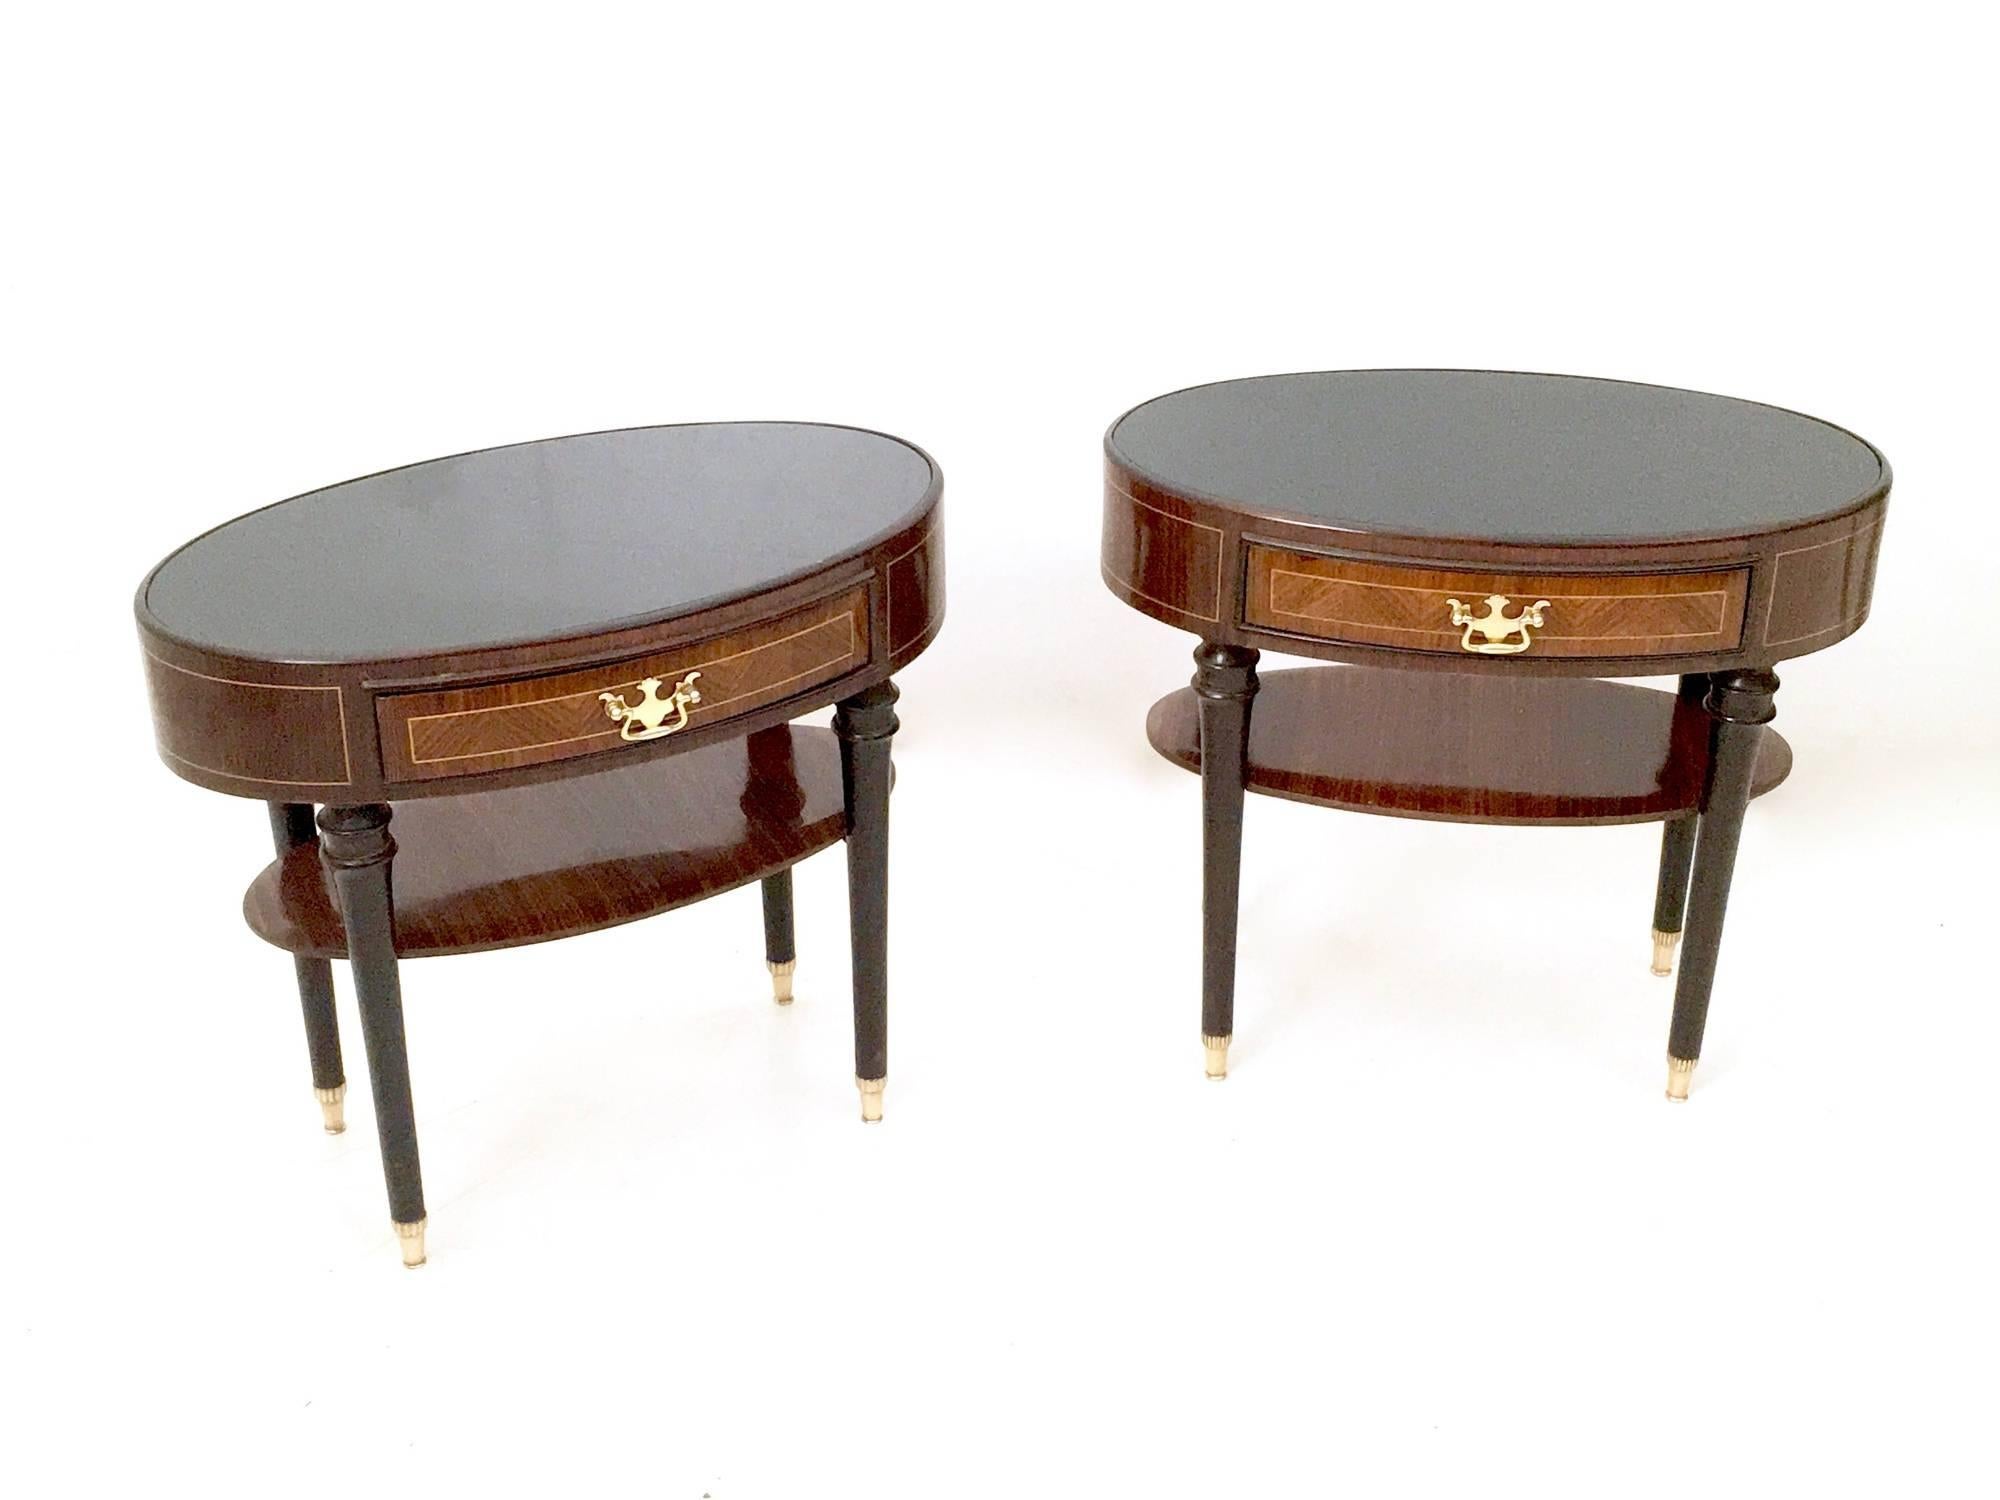 Made in wood and ebonized wood.
They feature a back-painted glass top and brass feet caps and handles.
In excellent original condition and ready to become a piece in a home.

Measures: Width 57.5 cm
Depth 34 cm 
Height 51 cm.